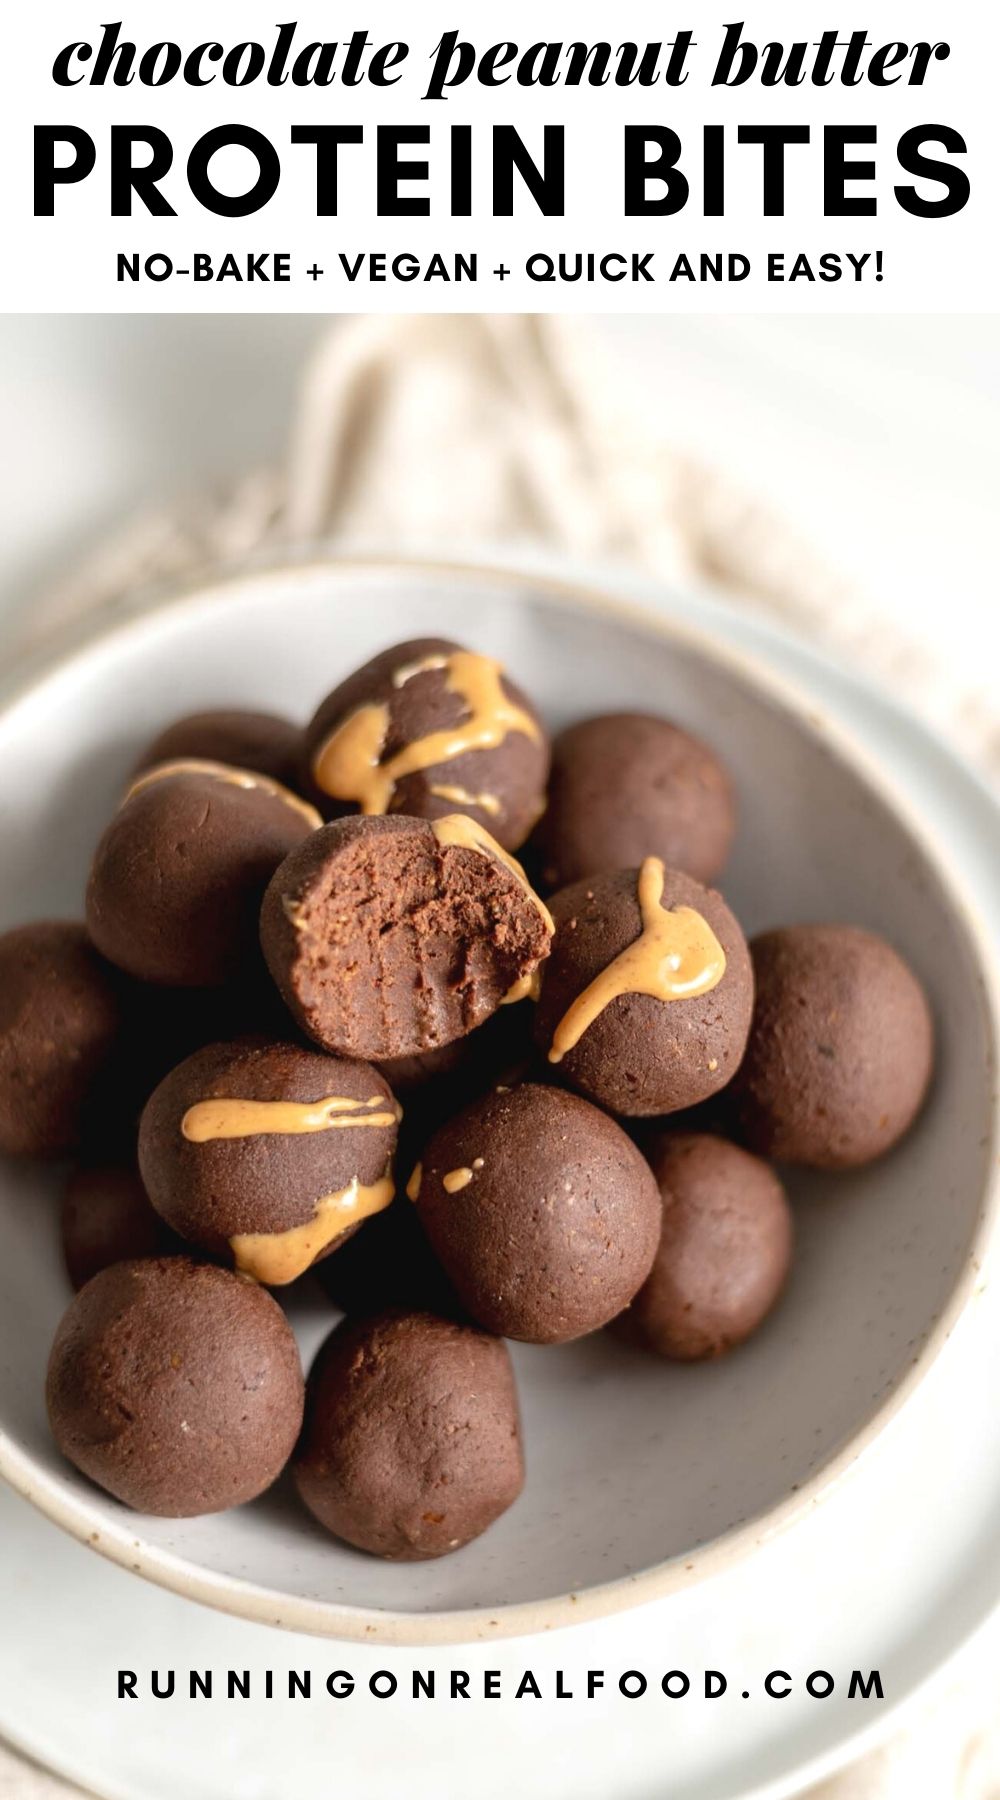 Pinterest graphic with an image and text for chocolate peanut butter protein balls.